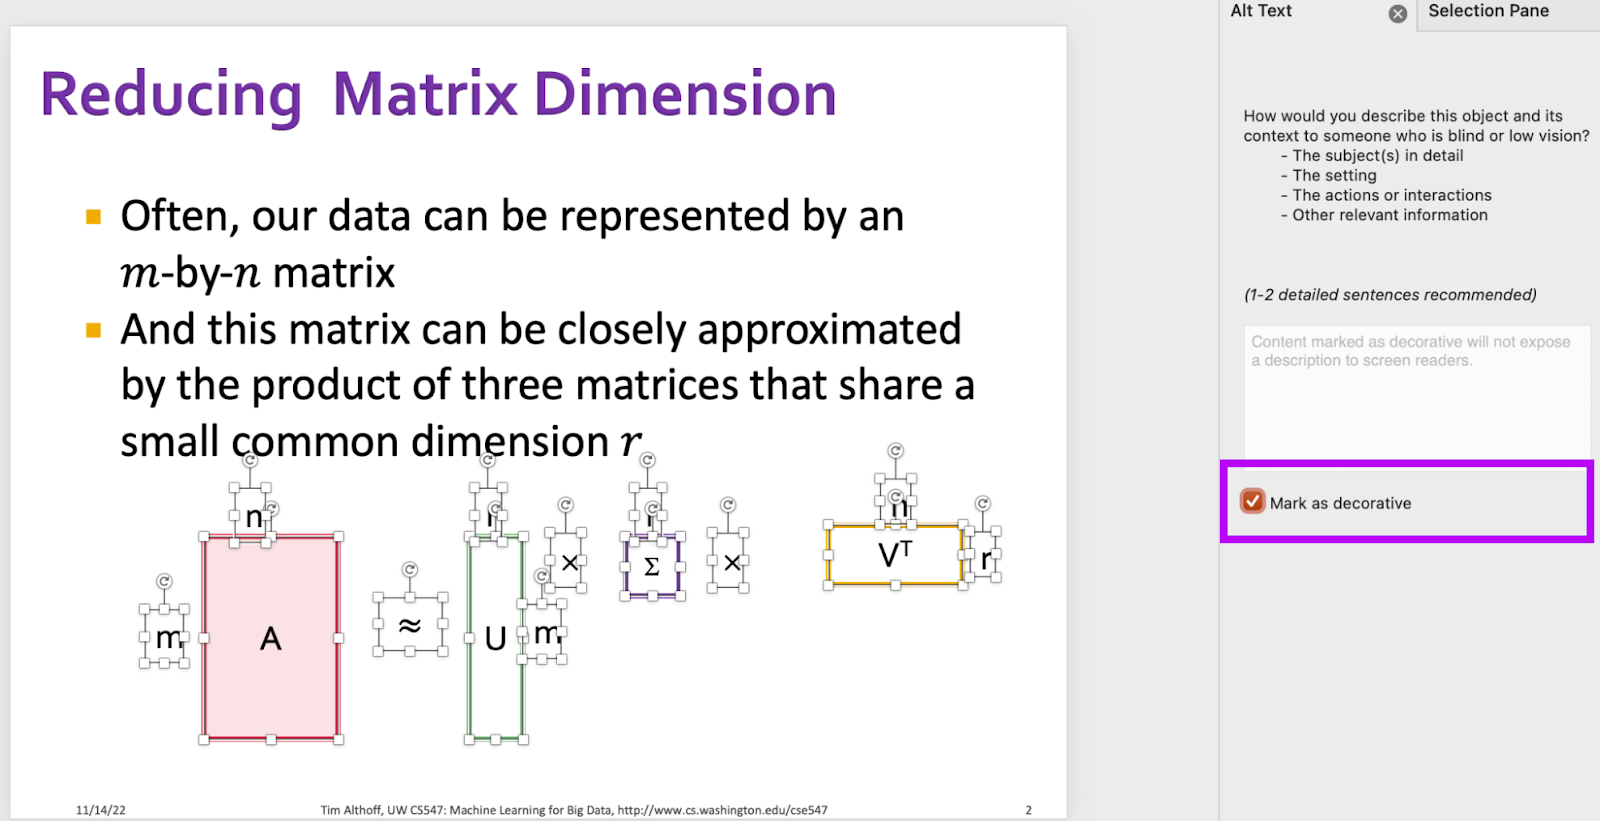 This is a screenshot of a powerpoint slide and the Alt Text Panel. on the left, there is a powerpoint slide titled "Reducing Matrix Dimension", followed by text description, and then followed by math equation A \appro U \Sigma V^T. All three components are laid out in matrix format to make it easy to comprehend. The rows and columns number are denoted in various numbers. On the right is the "Alt Text" pane. In the pane, "Mark as decorative" is selected.